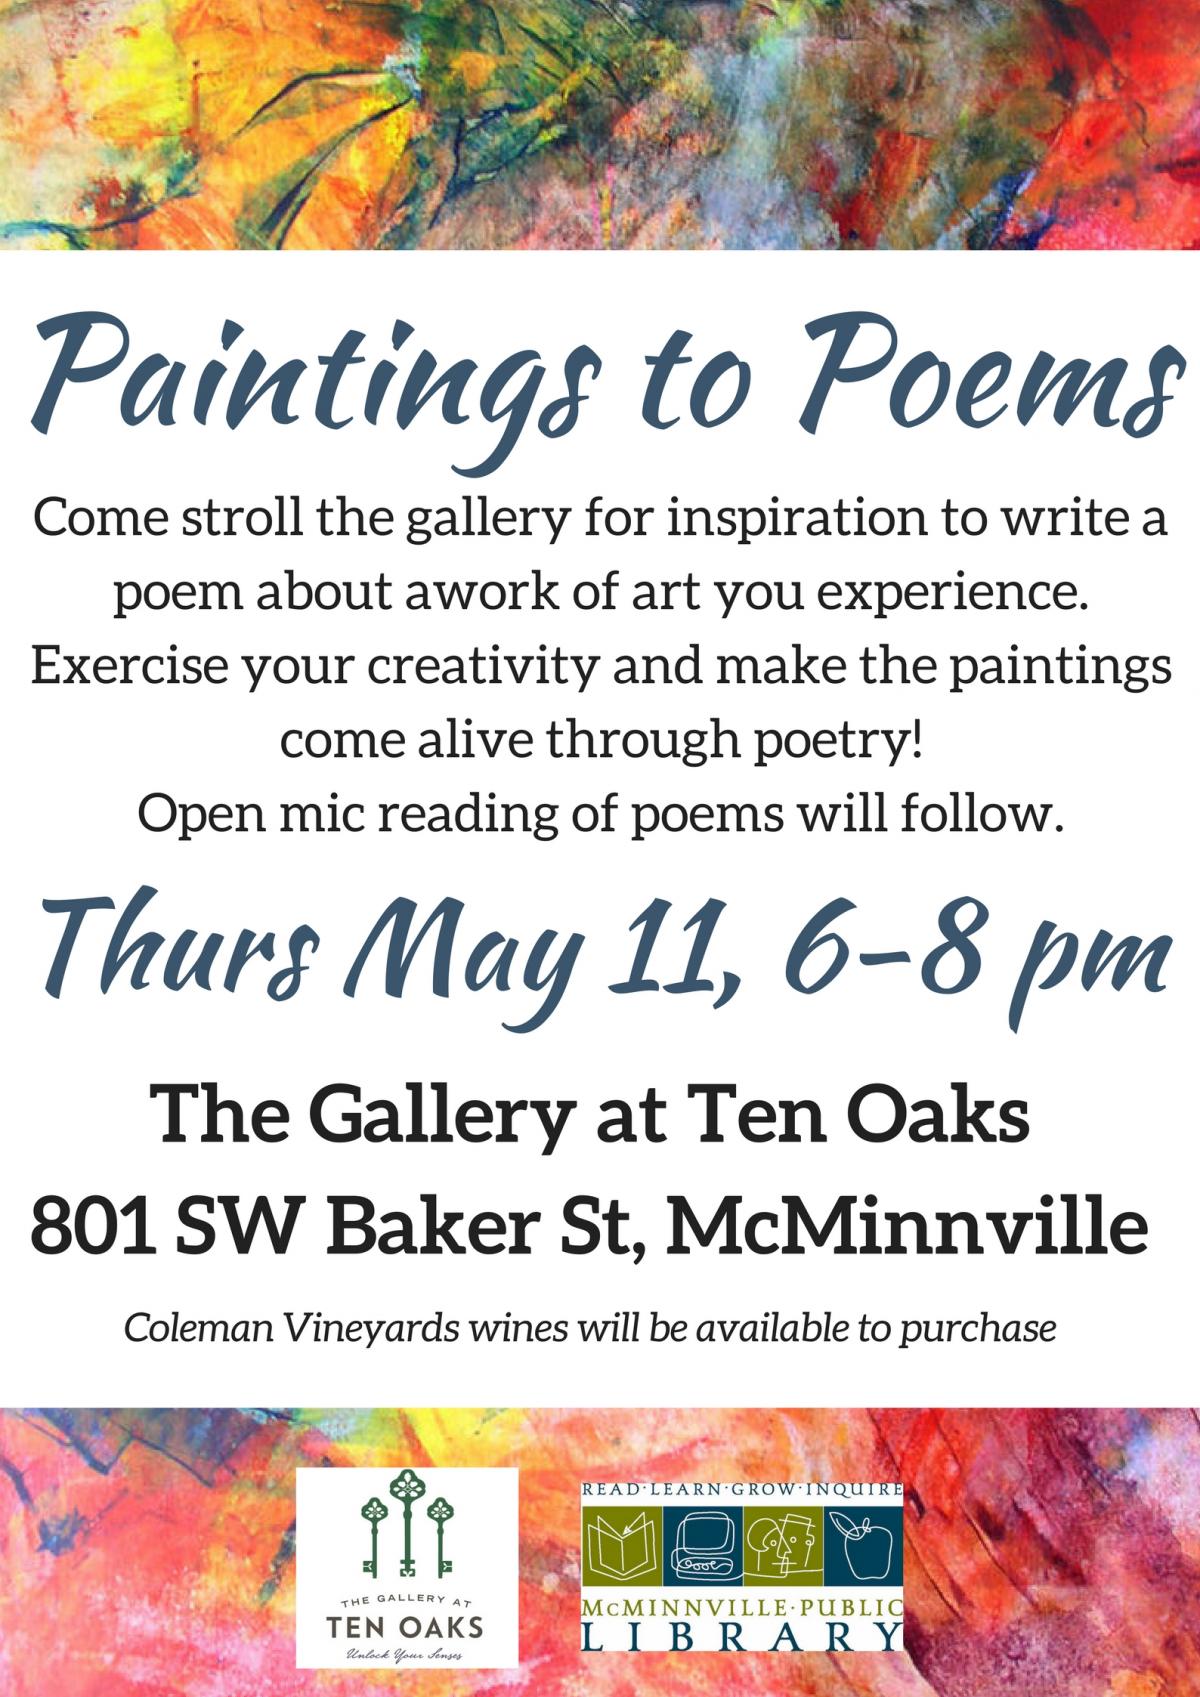 Paintings to Poems flyer